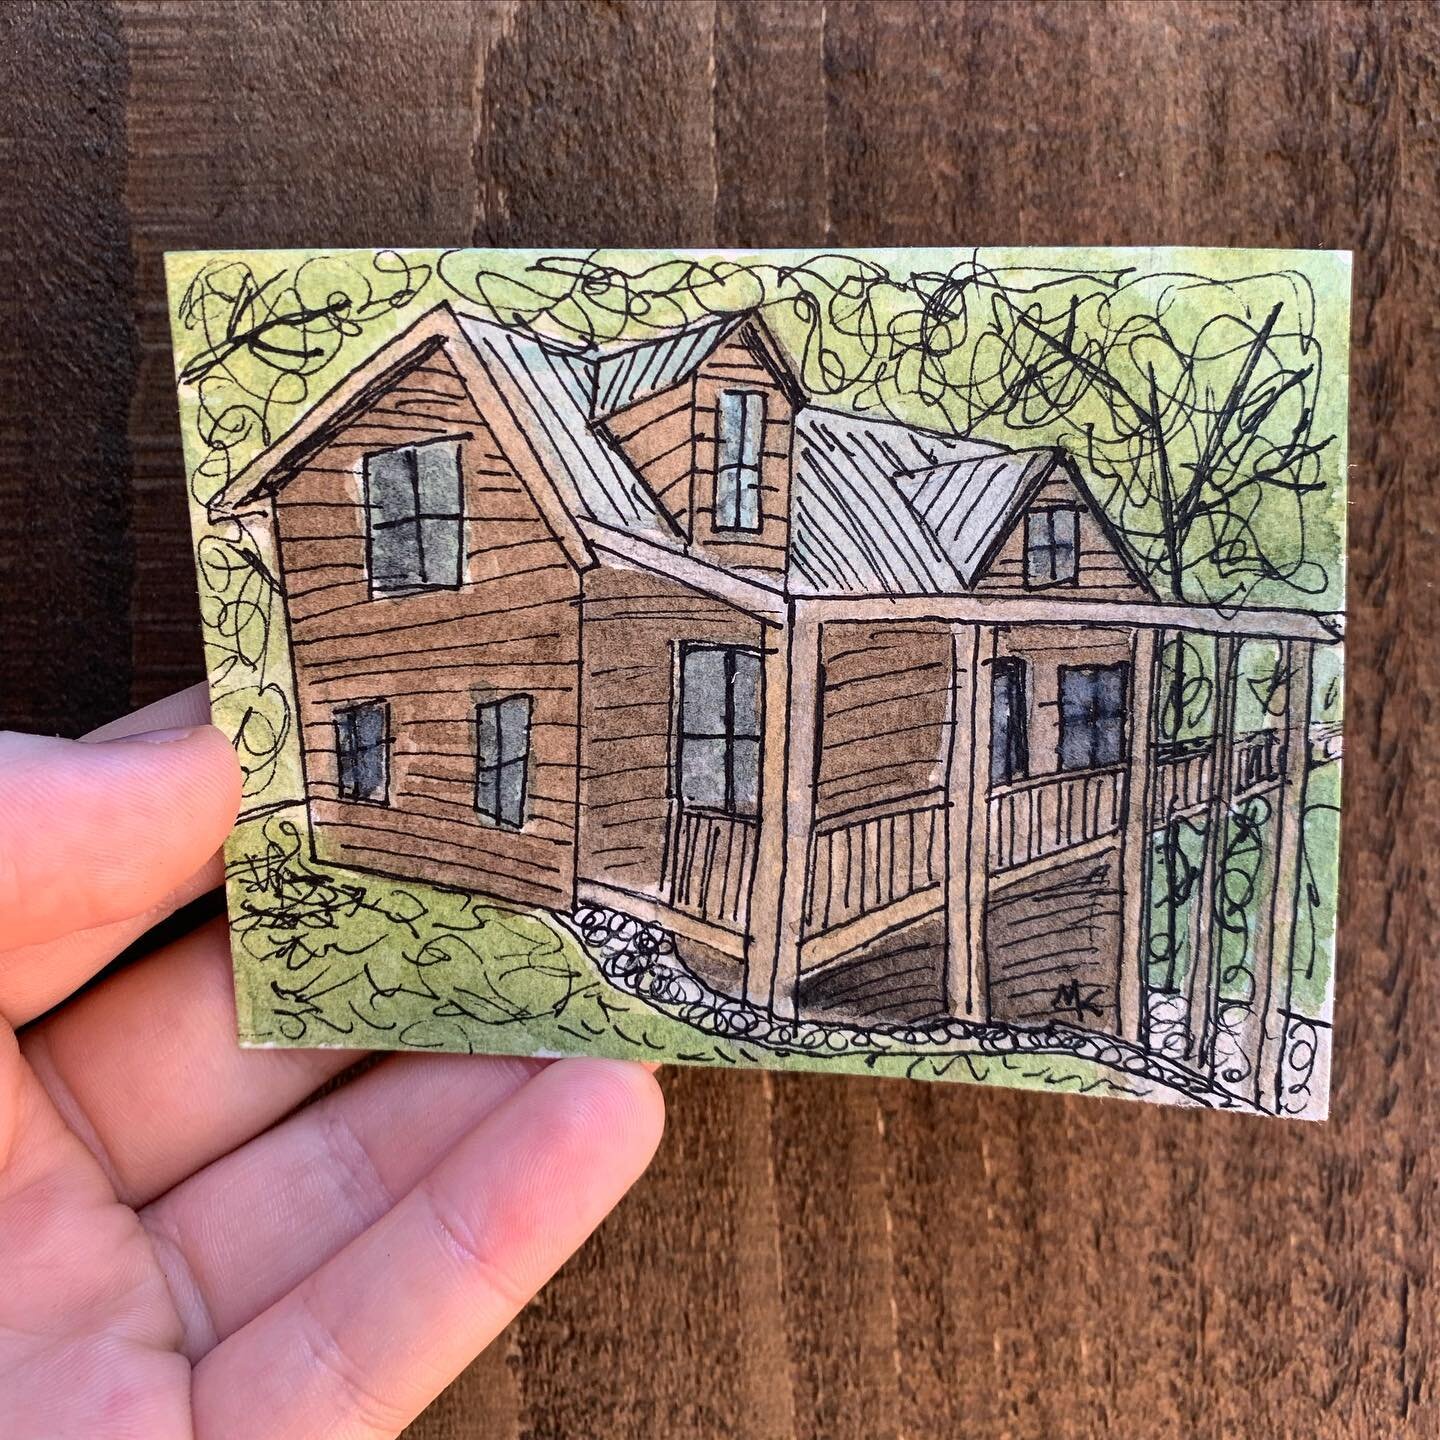 I&rsquo;ve been out of town for a few weeks recharging and making/teaching some art @campgreystone, but I&rsquo;m back, gearing up for the school year, and ready to share some more minis from this summer! #minihouseportrait #houseportrait #chattanoog